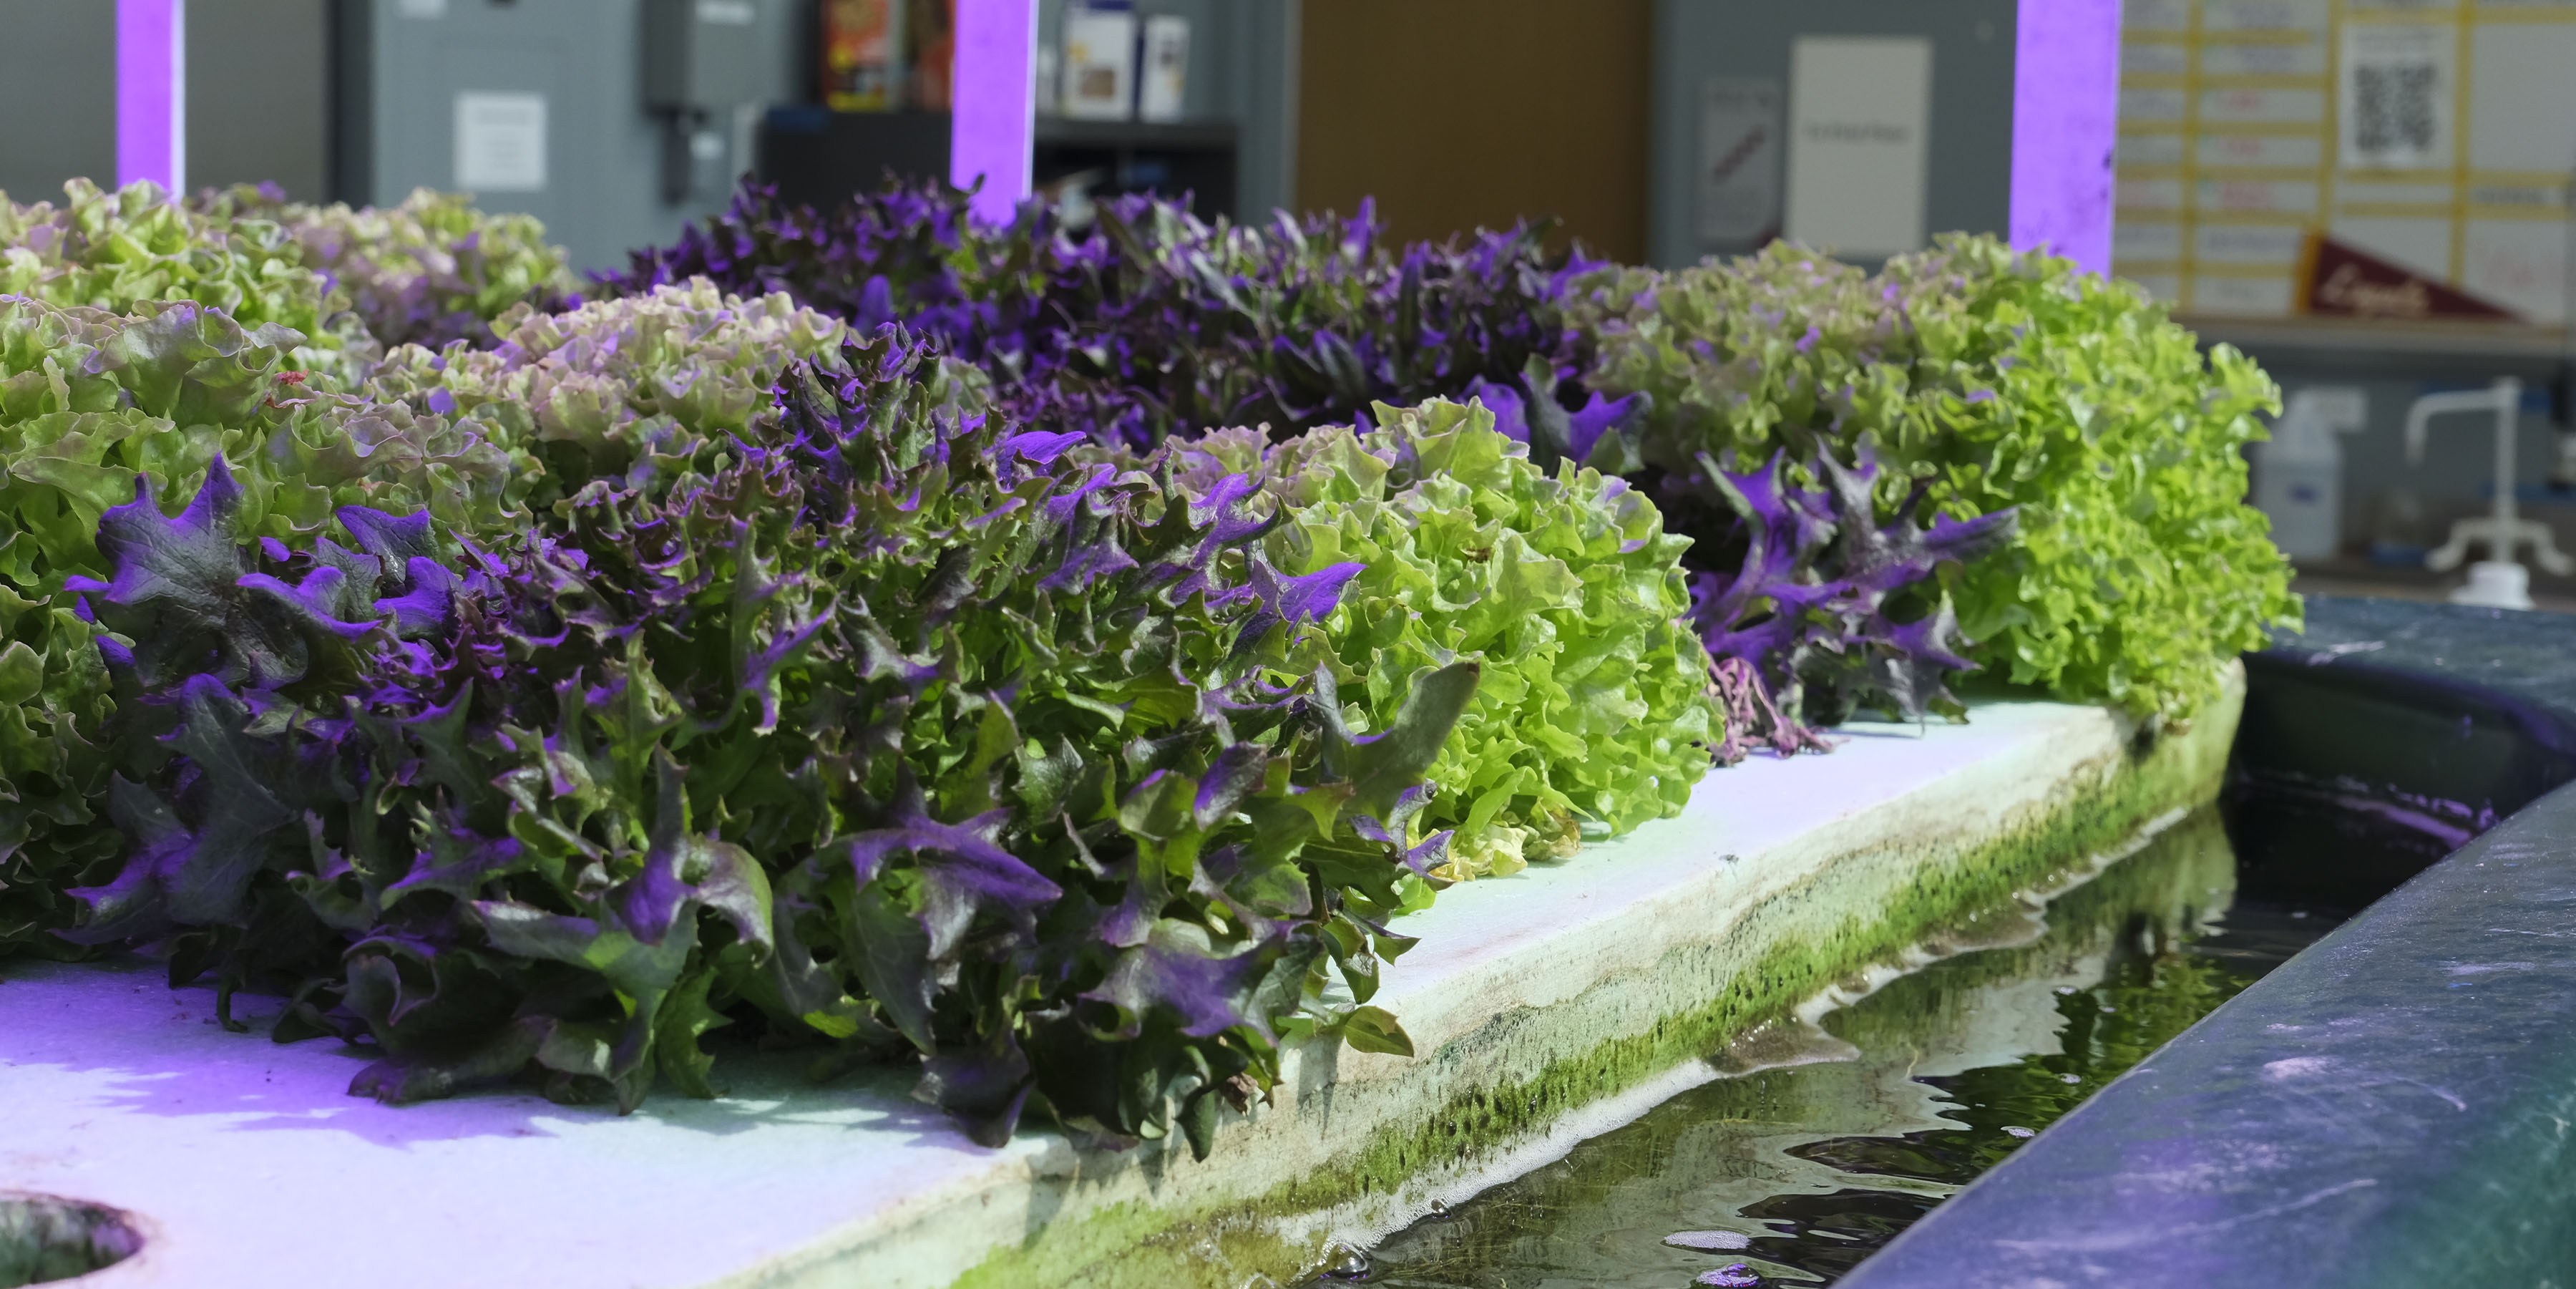 Aquaponics system with lettuce